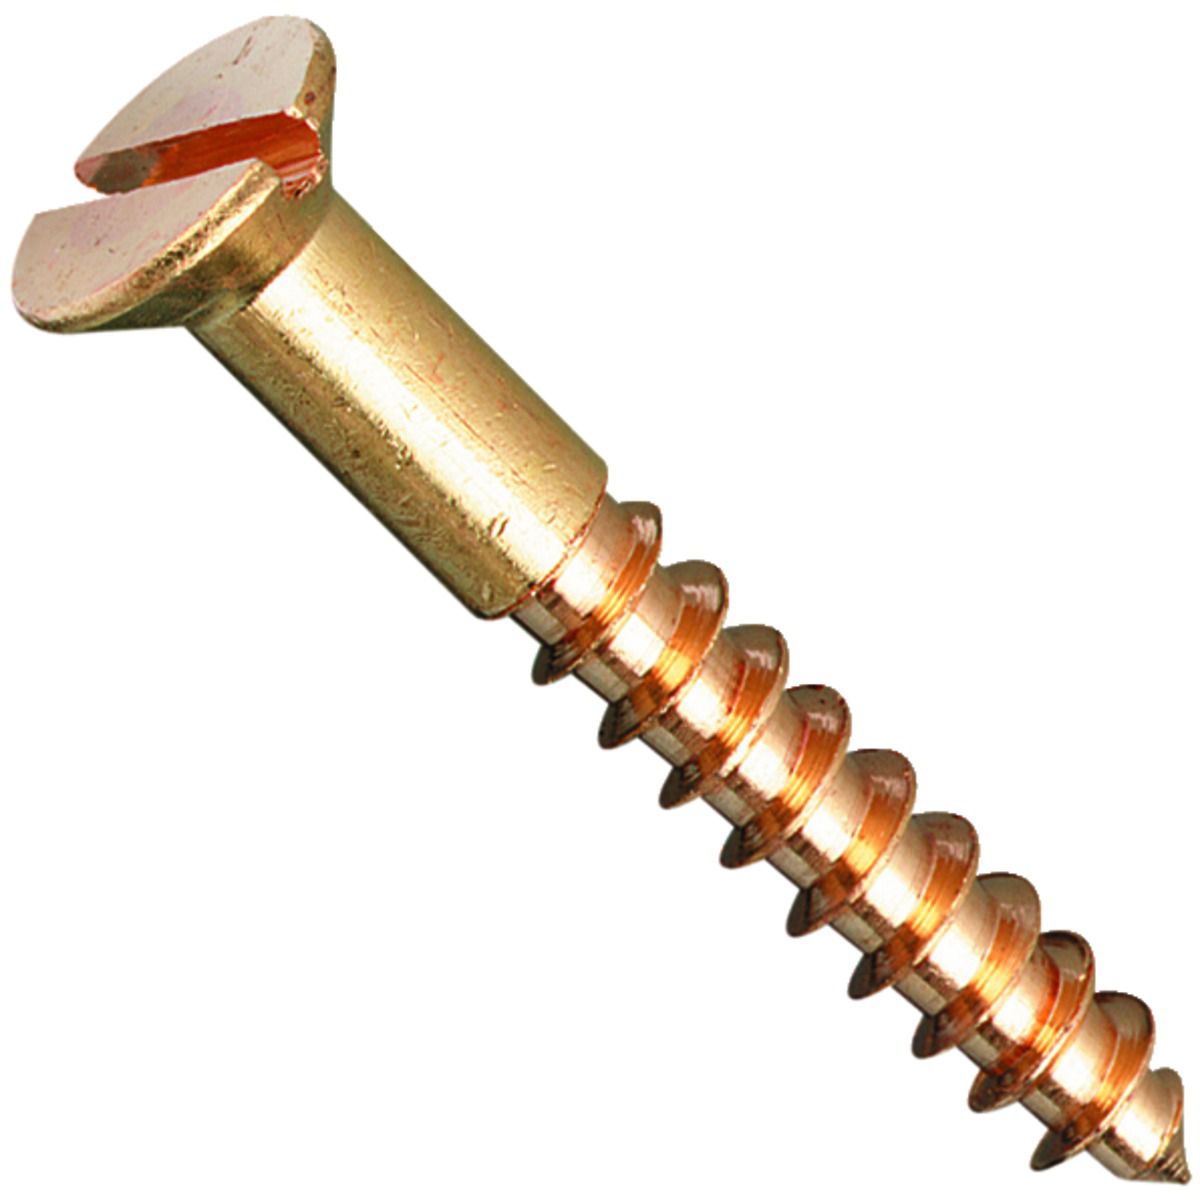 Image of Wickes Brass Wood Screws - No 10 x 38mm Pack of 10